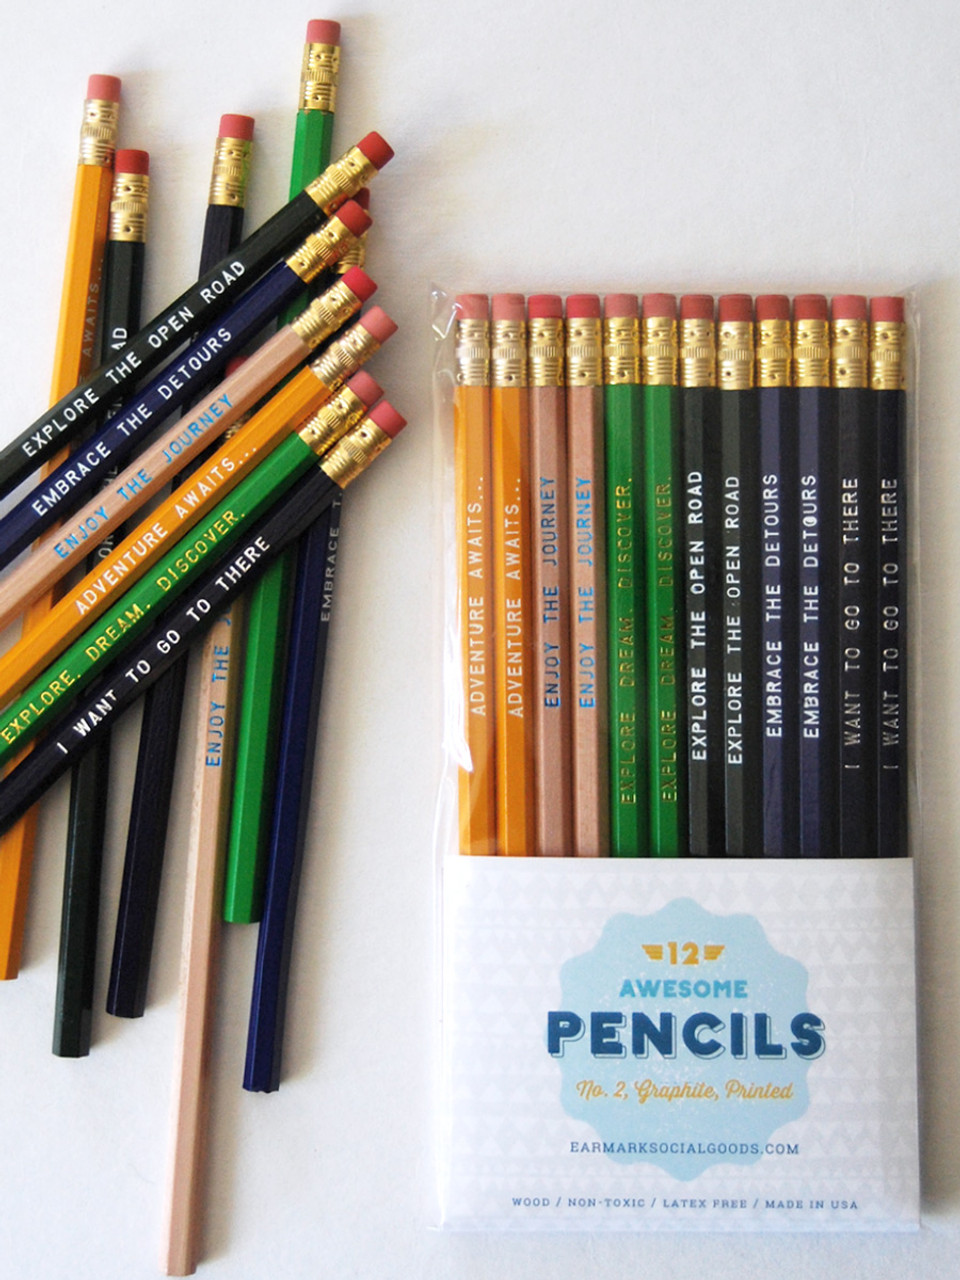 What Are Map Pencils?